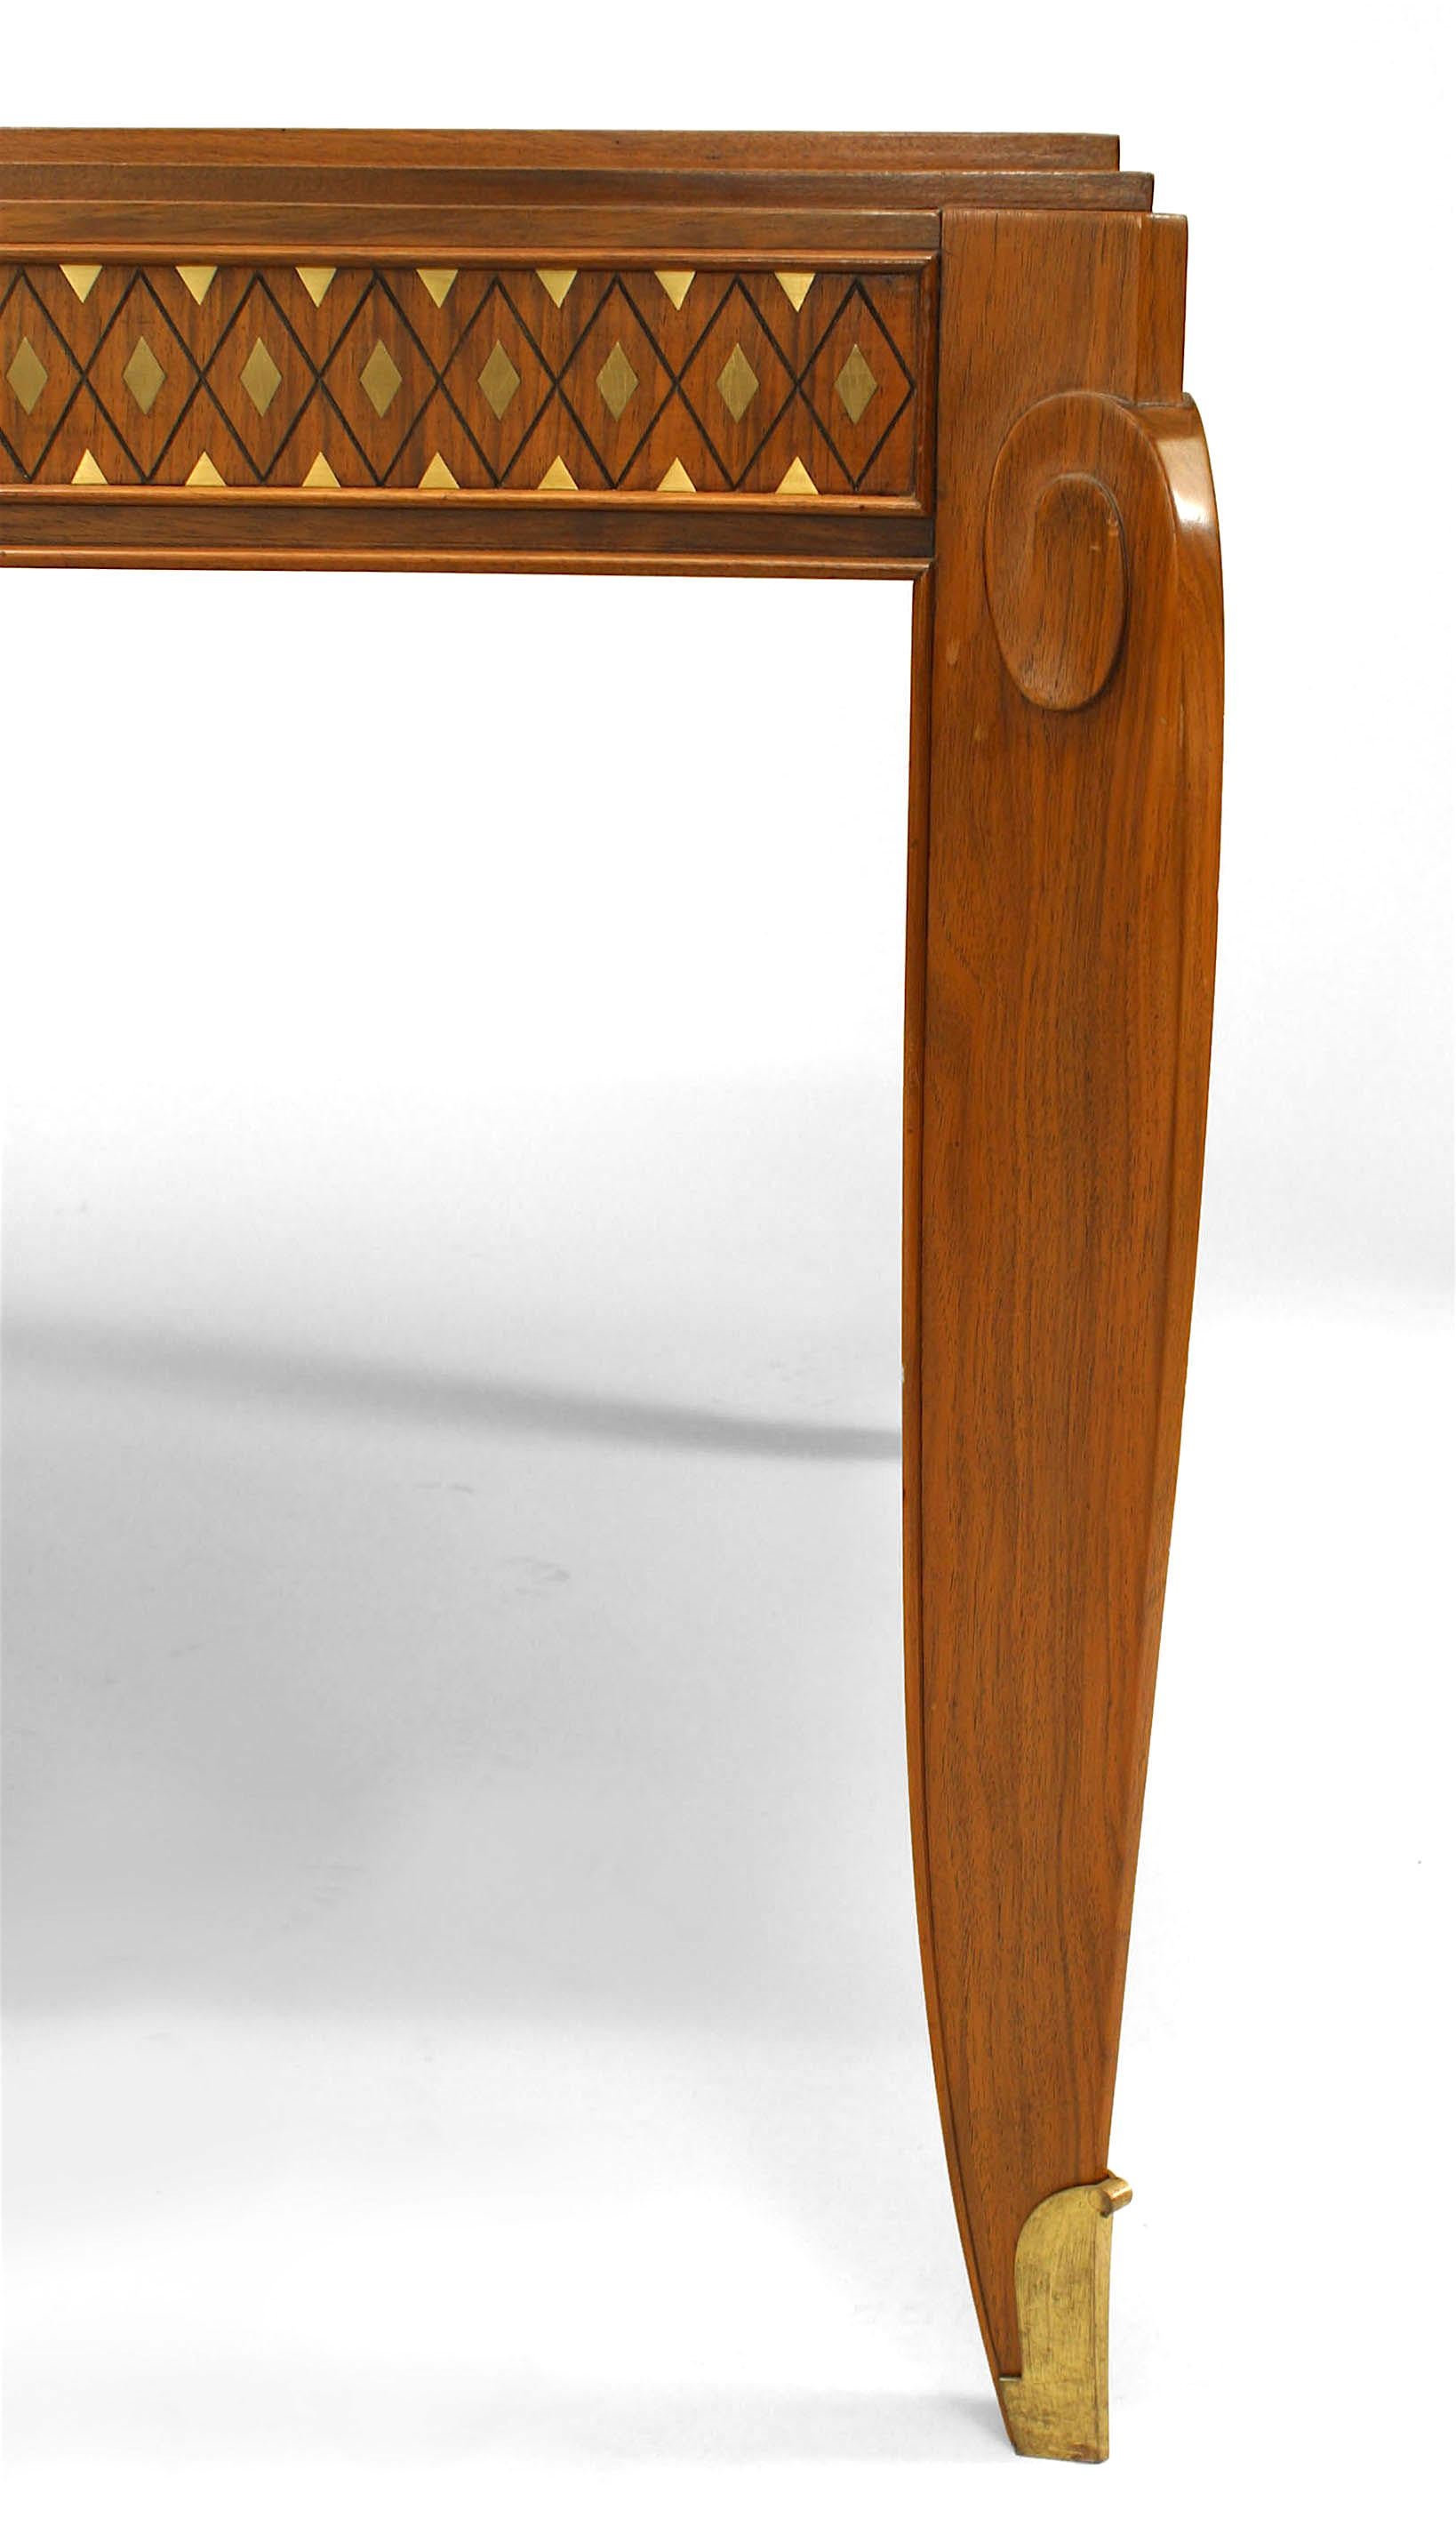 Jean Pascaud French Mid-Century Rosewood Palisander Dining Table In Good Condition For Sale In New York, NY